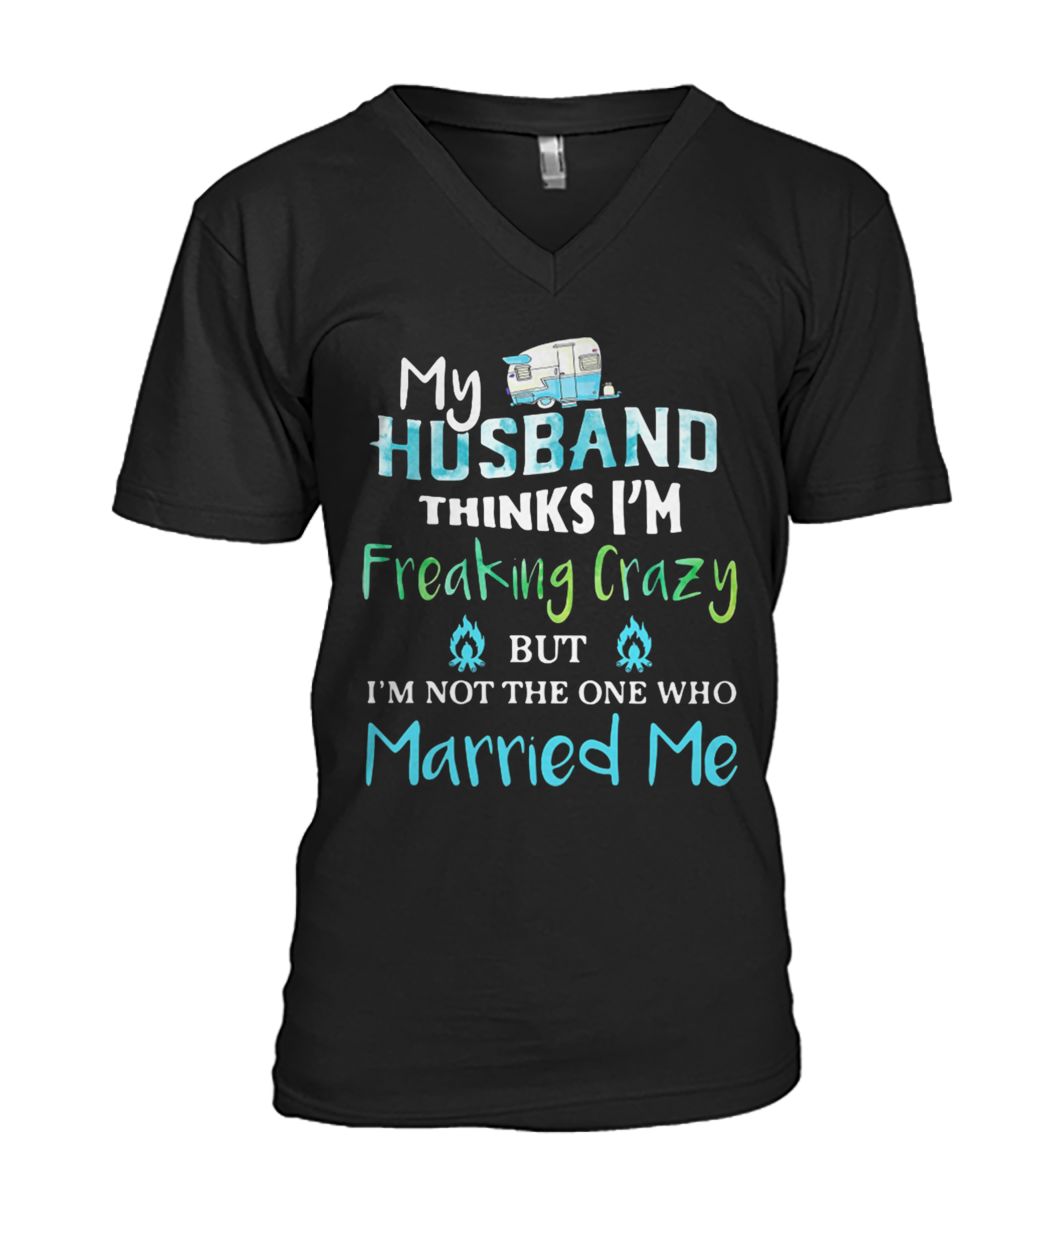 Camping my husband thinks I'm crazy but I'm not the one who married me mens v-neck